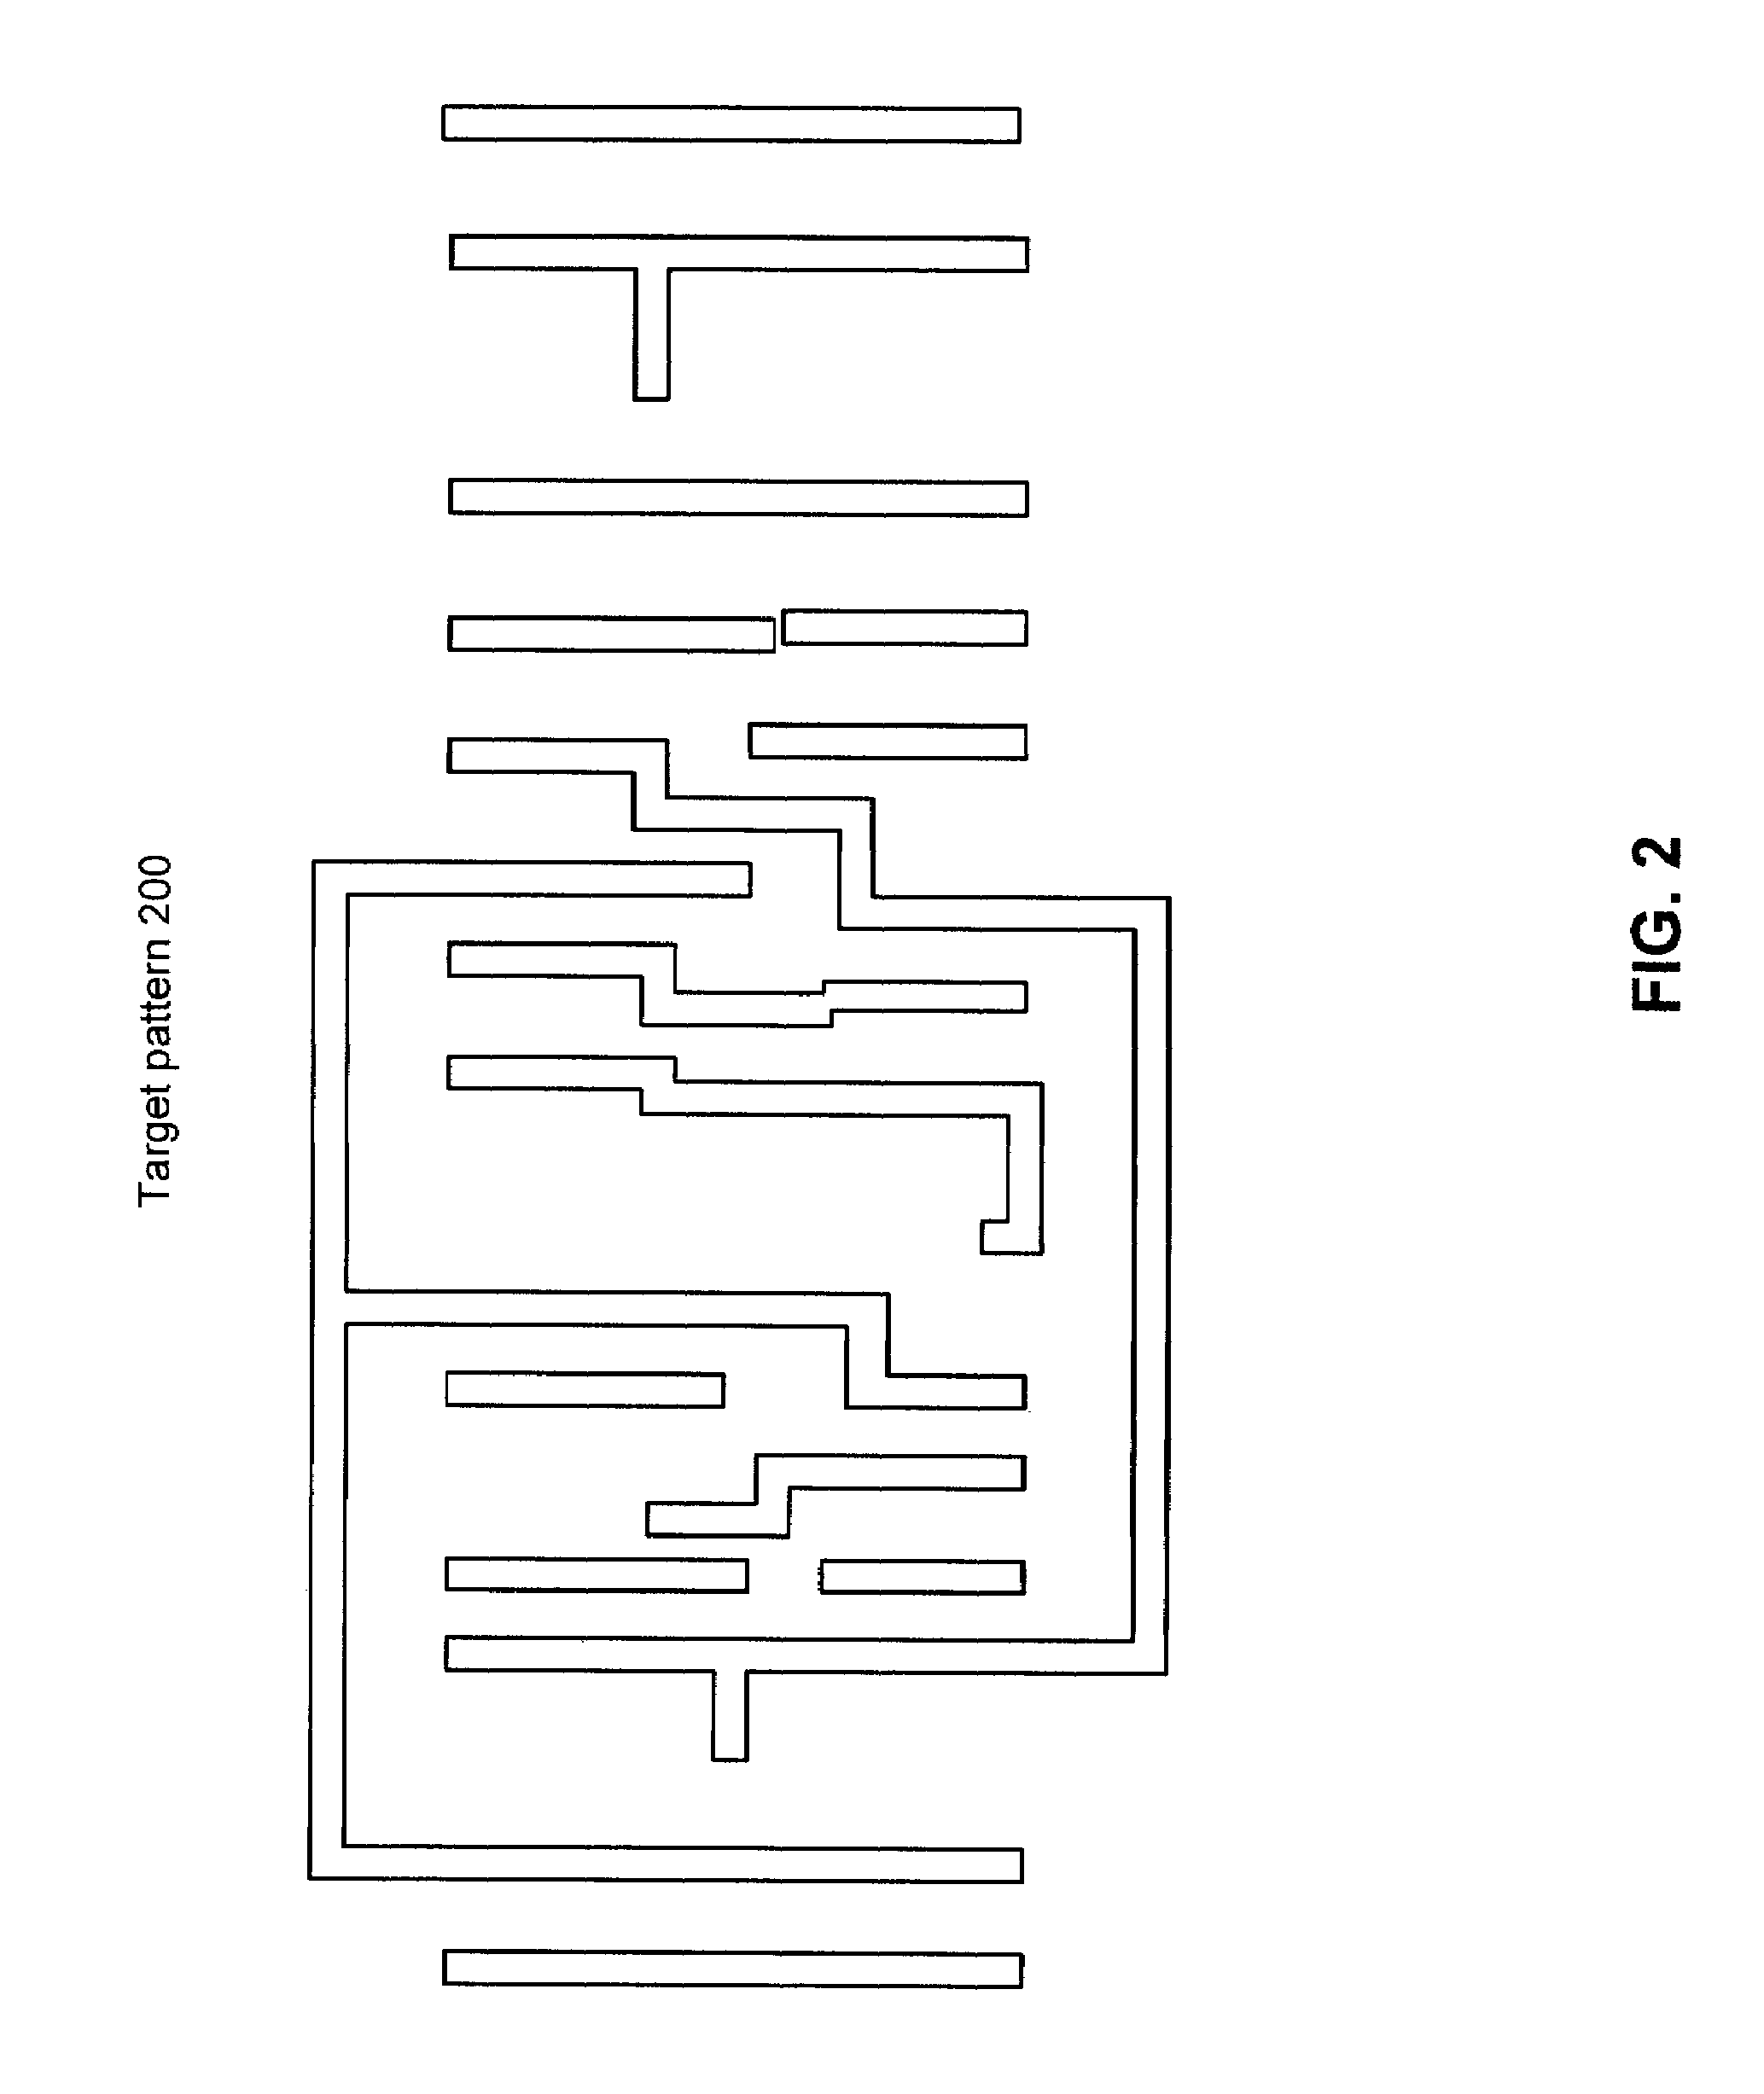 System, masks, and methods for photomasks optimized with approximate and accurate merit functions